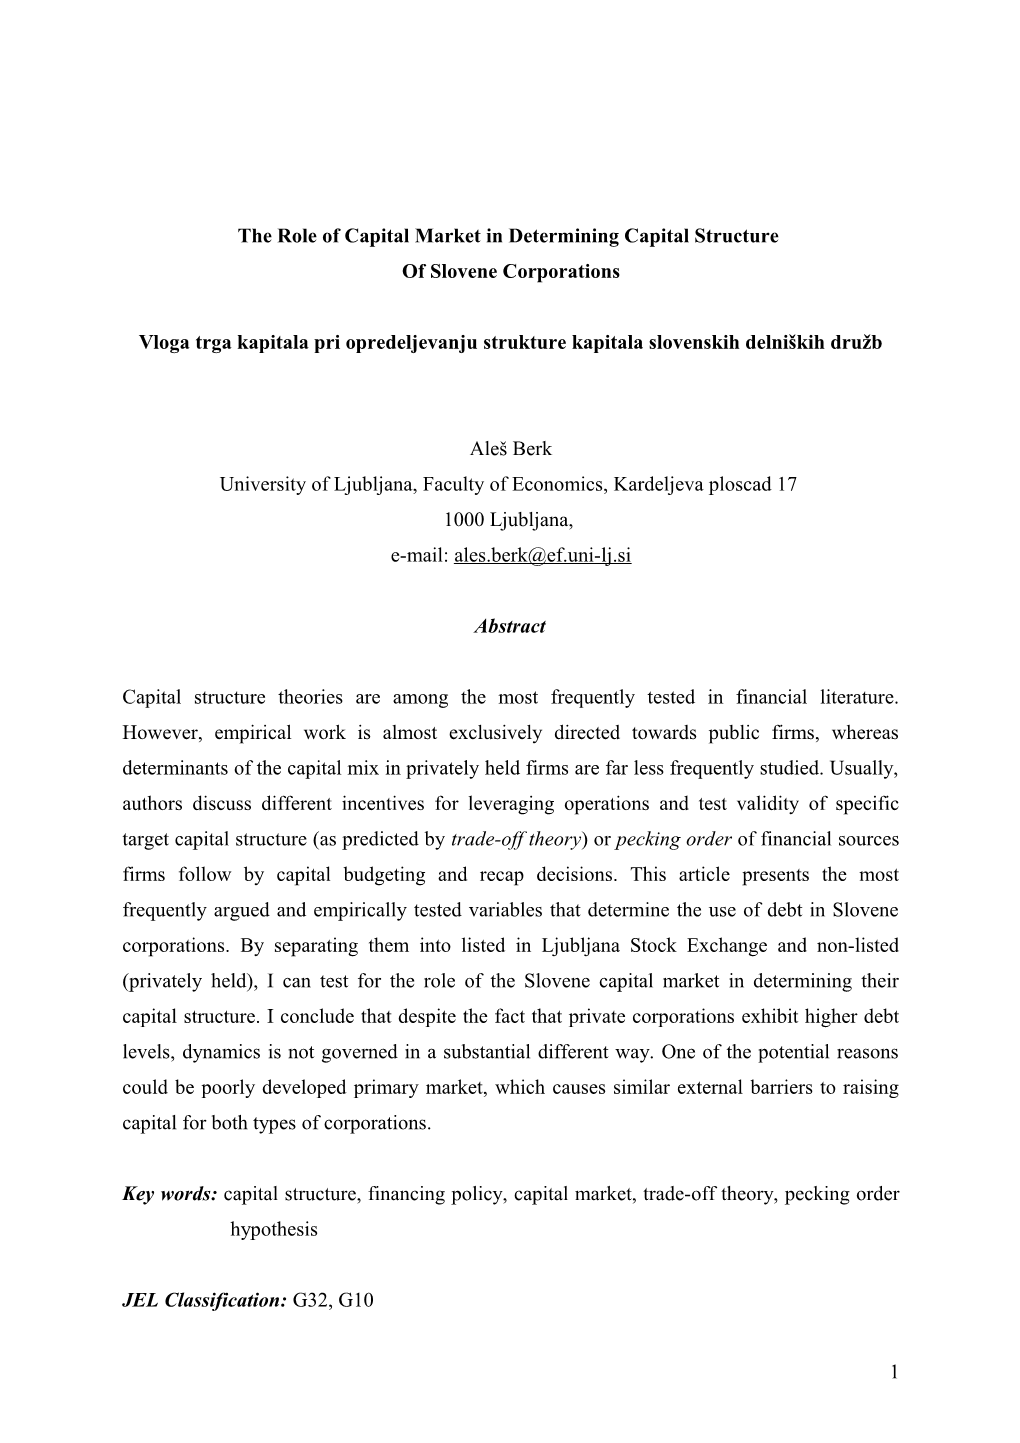 The Role of Capital Market in Determining Capital Structure